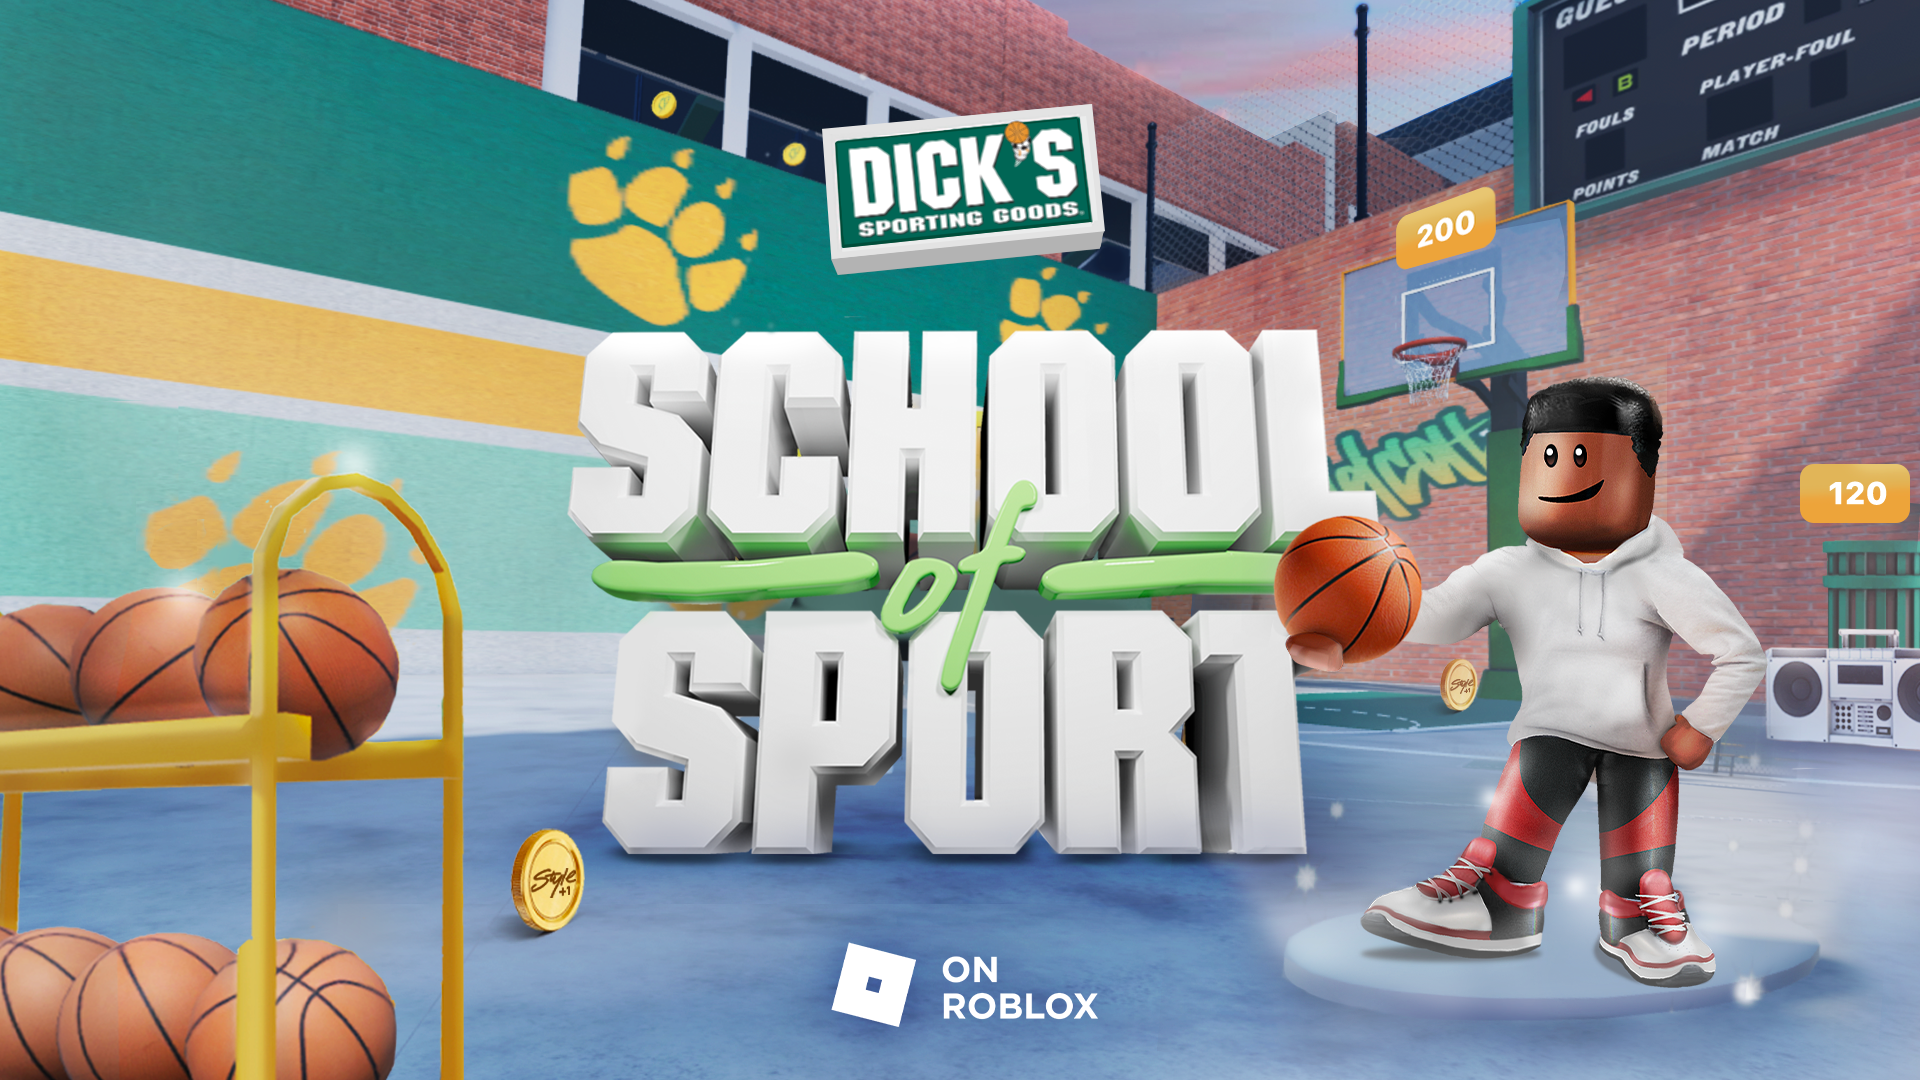 The Outdoor Cafeteria is the social hub where users can connect, collect Style Point coins, and shoot hoops on the nearby court